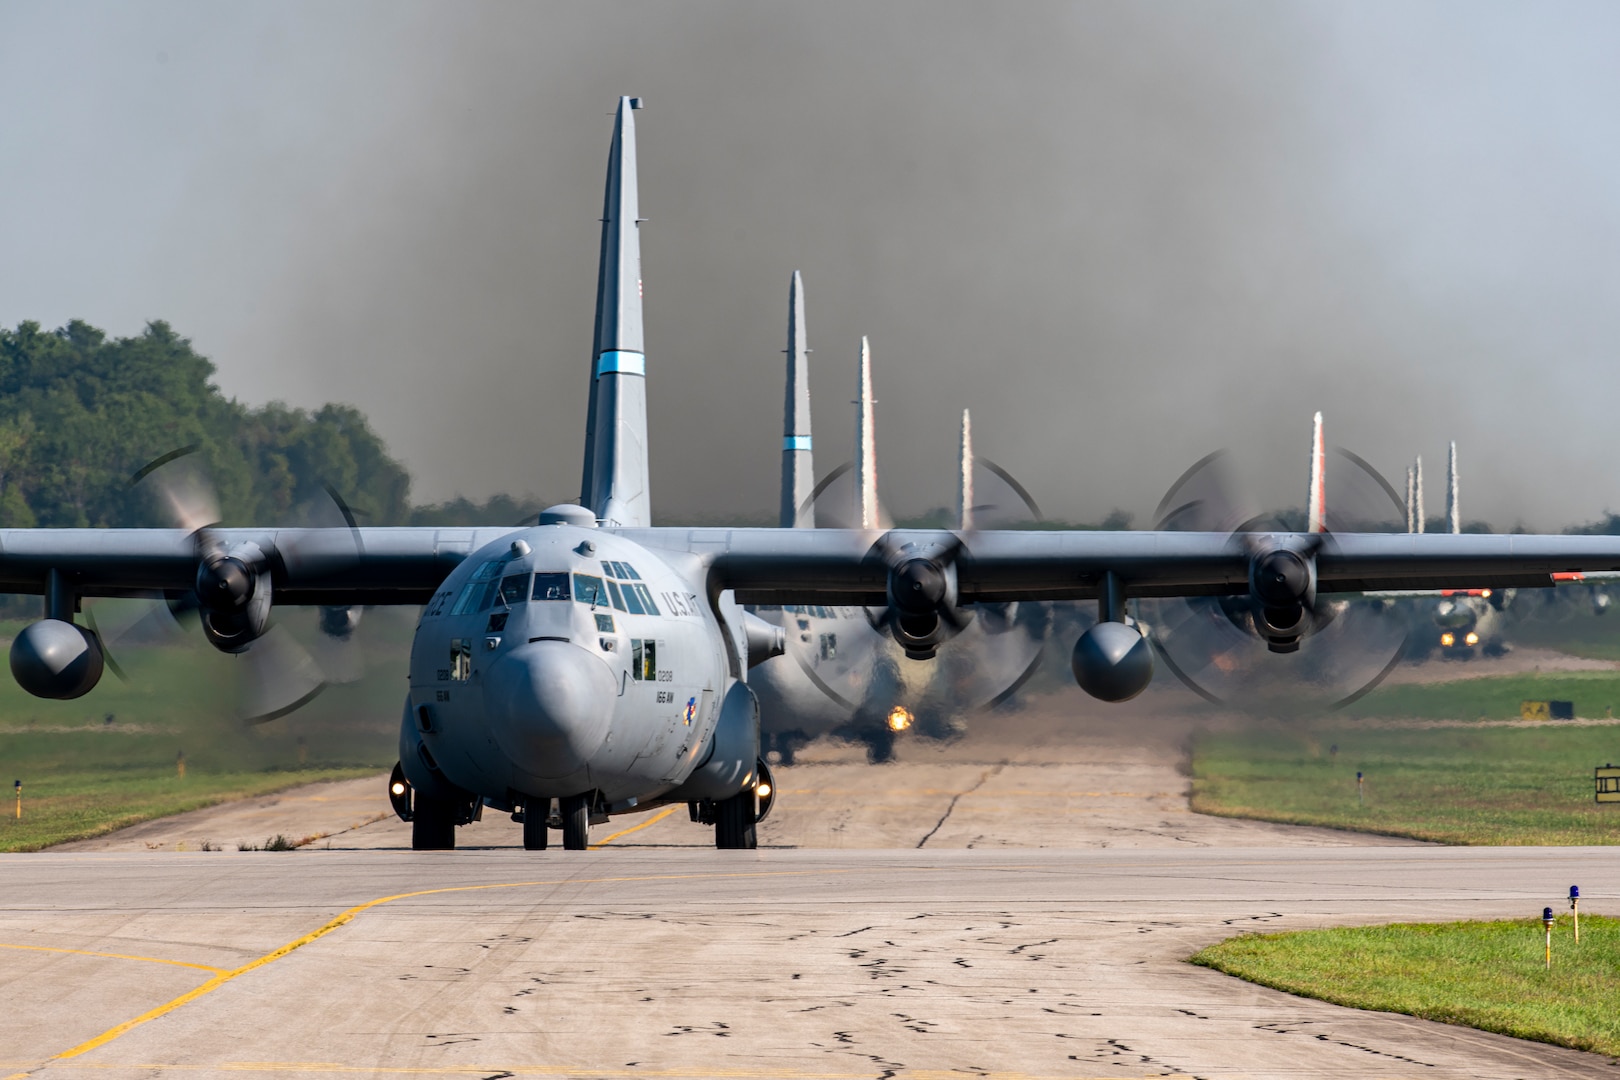 The 109th Airlift Wing conducted the unit’s first 'elephant walk' Sept. 10, 2022. An elephant walk is a U.S. Air Force term for the taxiing of military aircraft in close formation, often employed to project air power through the rapid deployment of multiple aircraft at once.